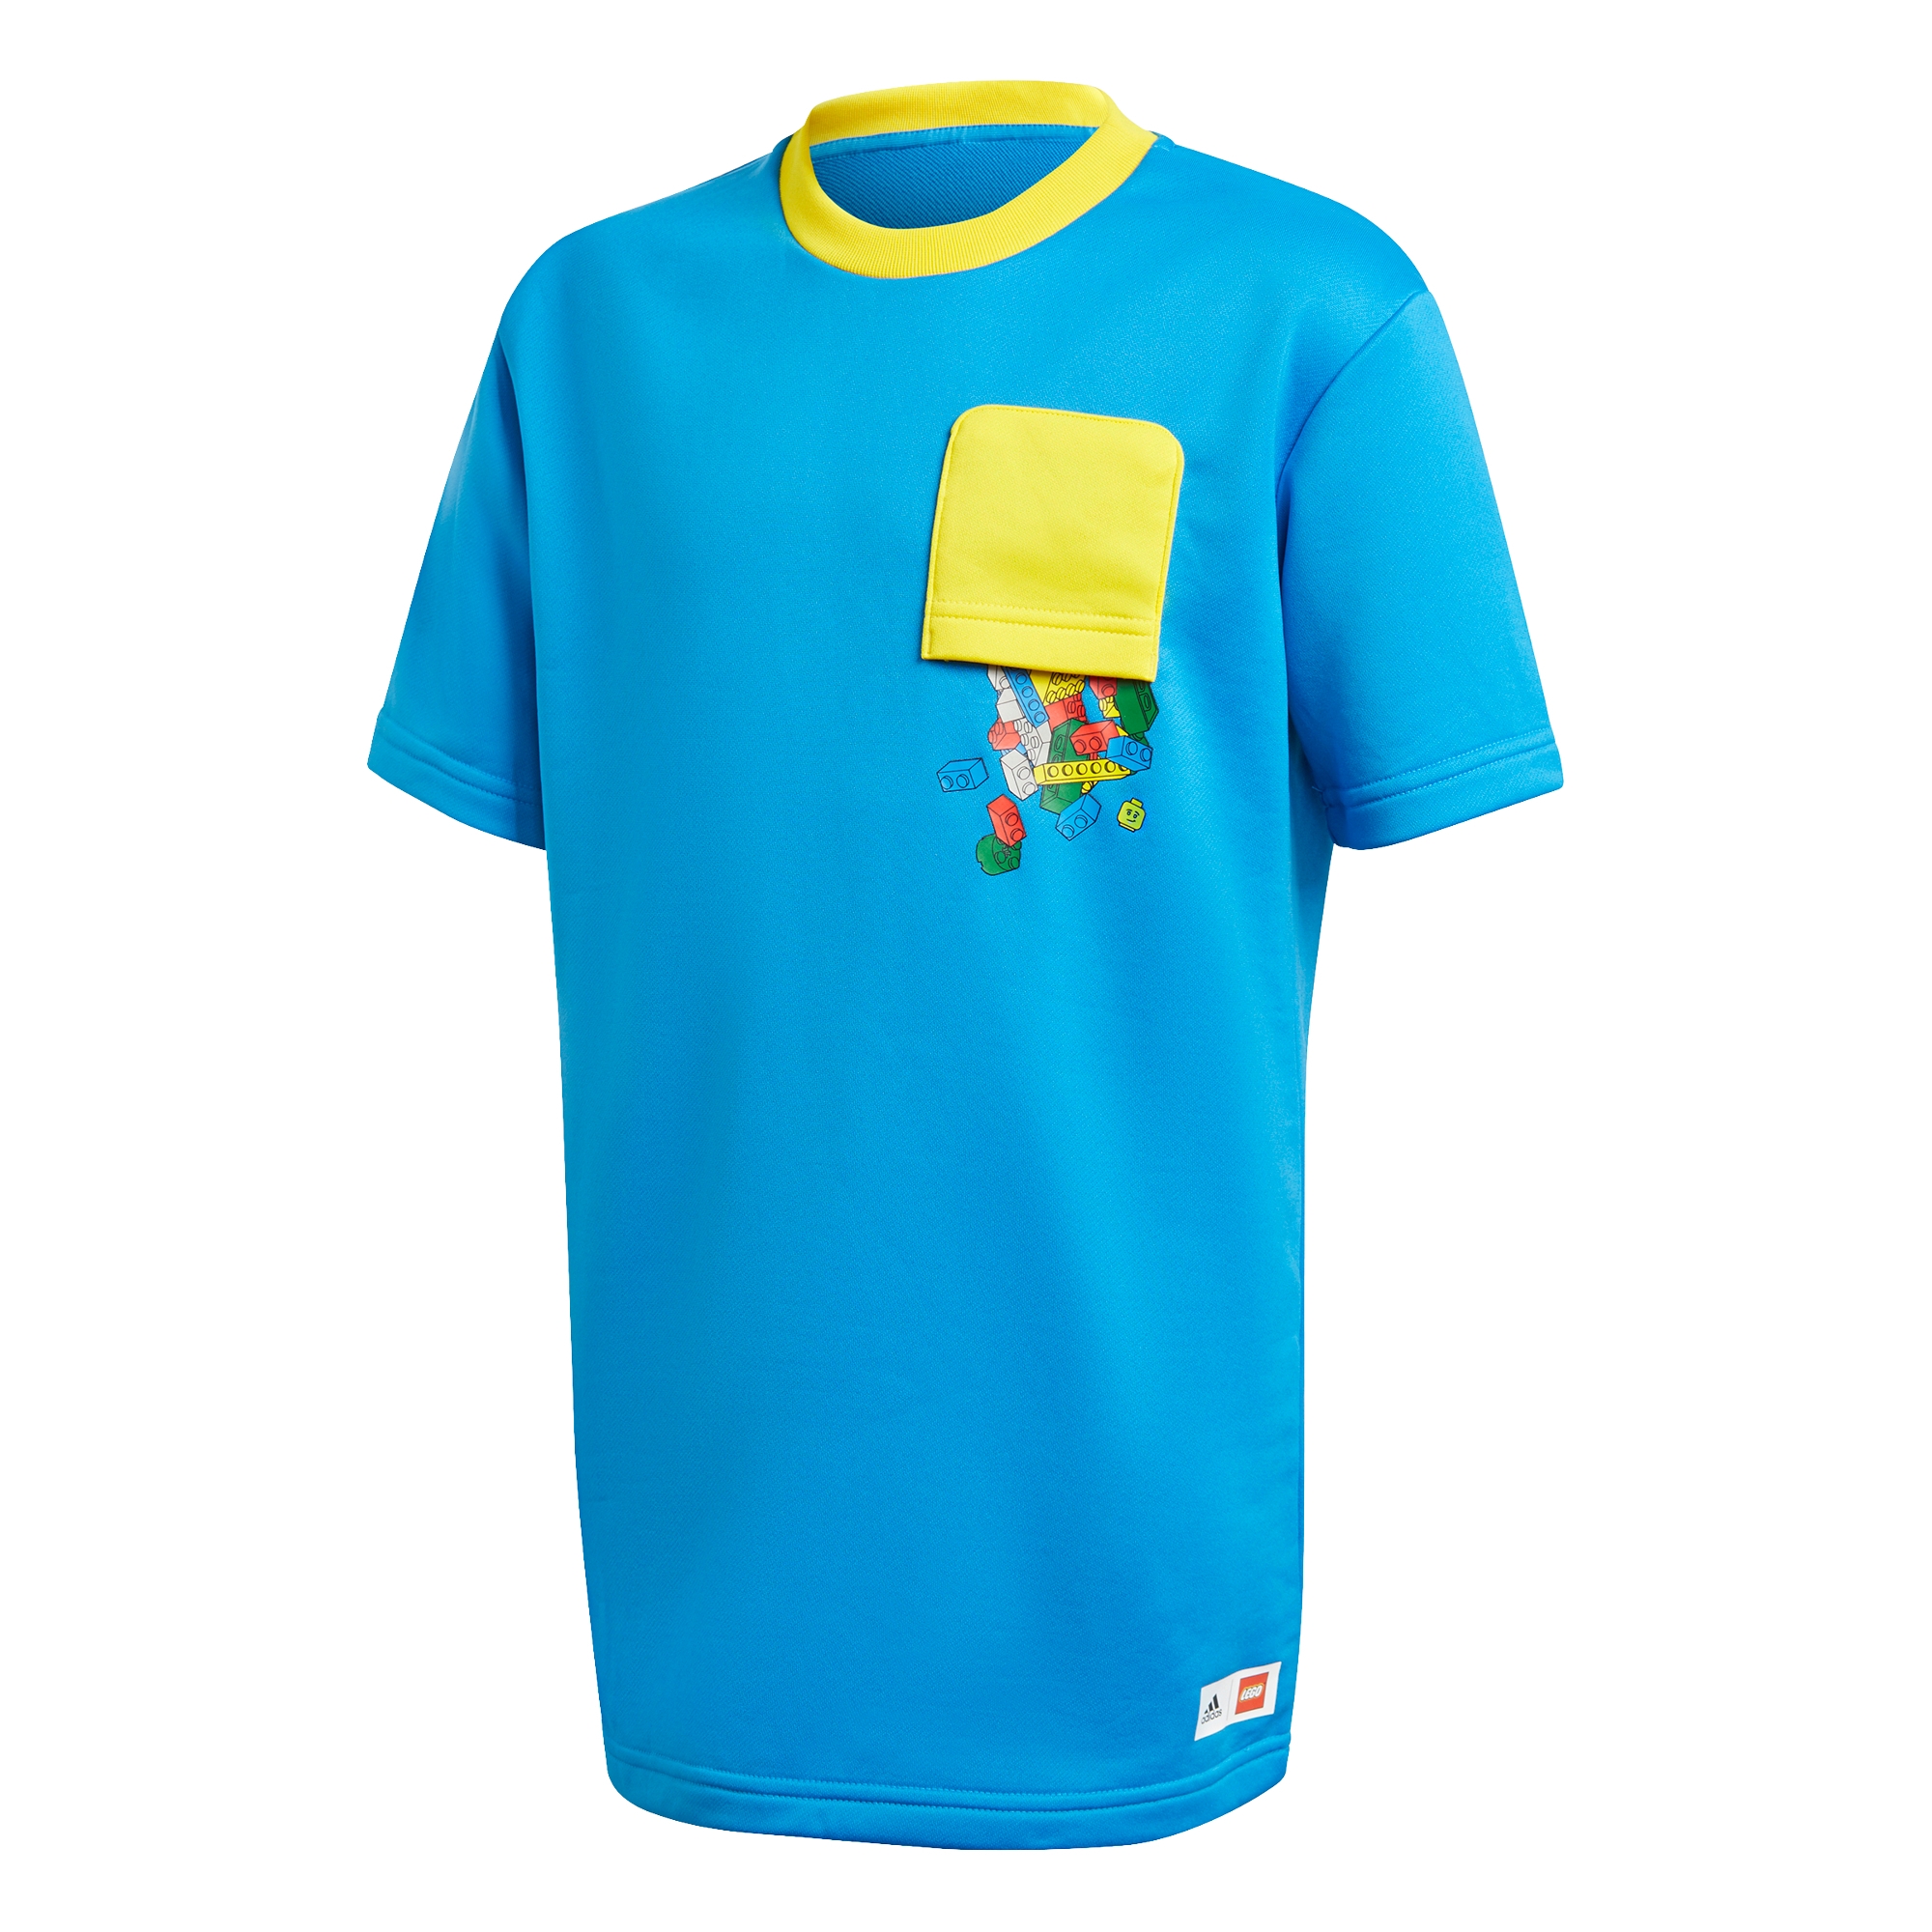 adidas x Classic LEGO® Bricks Loose Fit T-Shirt - Available in 3 Colors